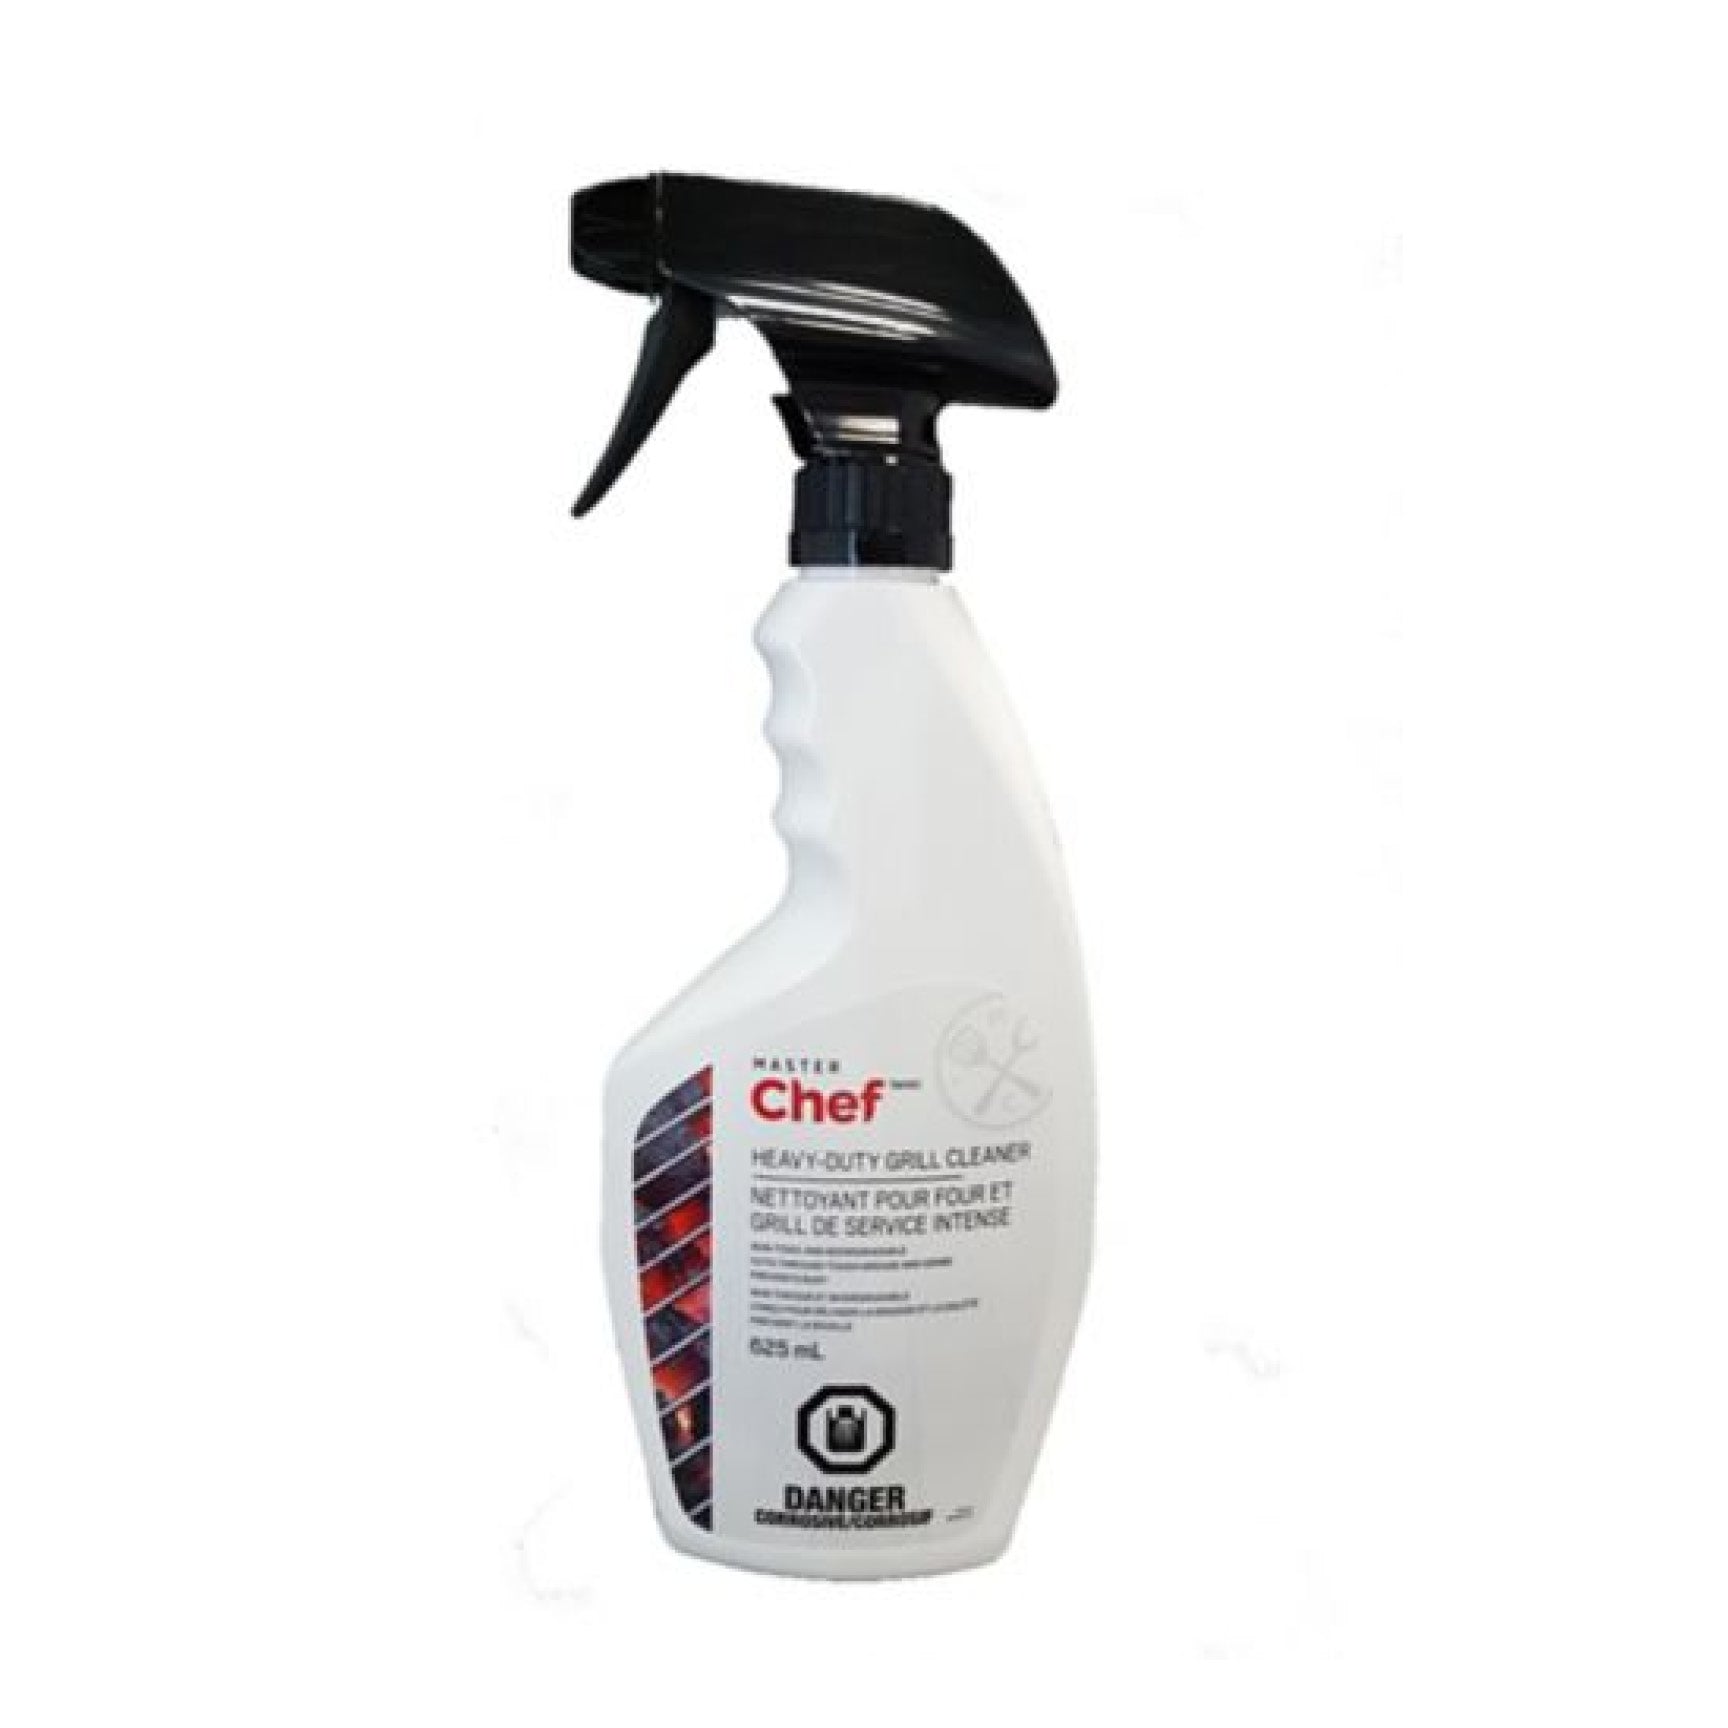 MASTER Chef BBQ Grill Cleaner